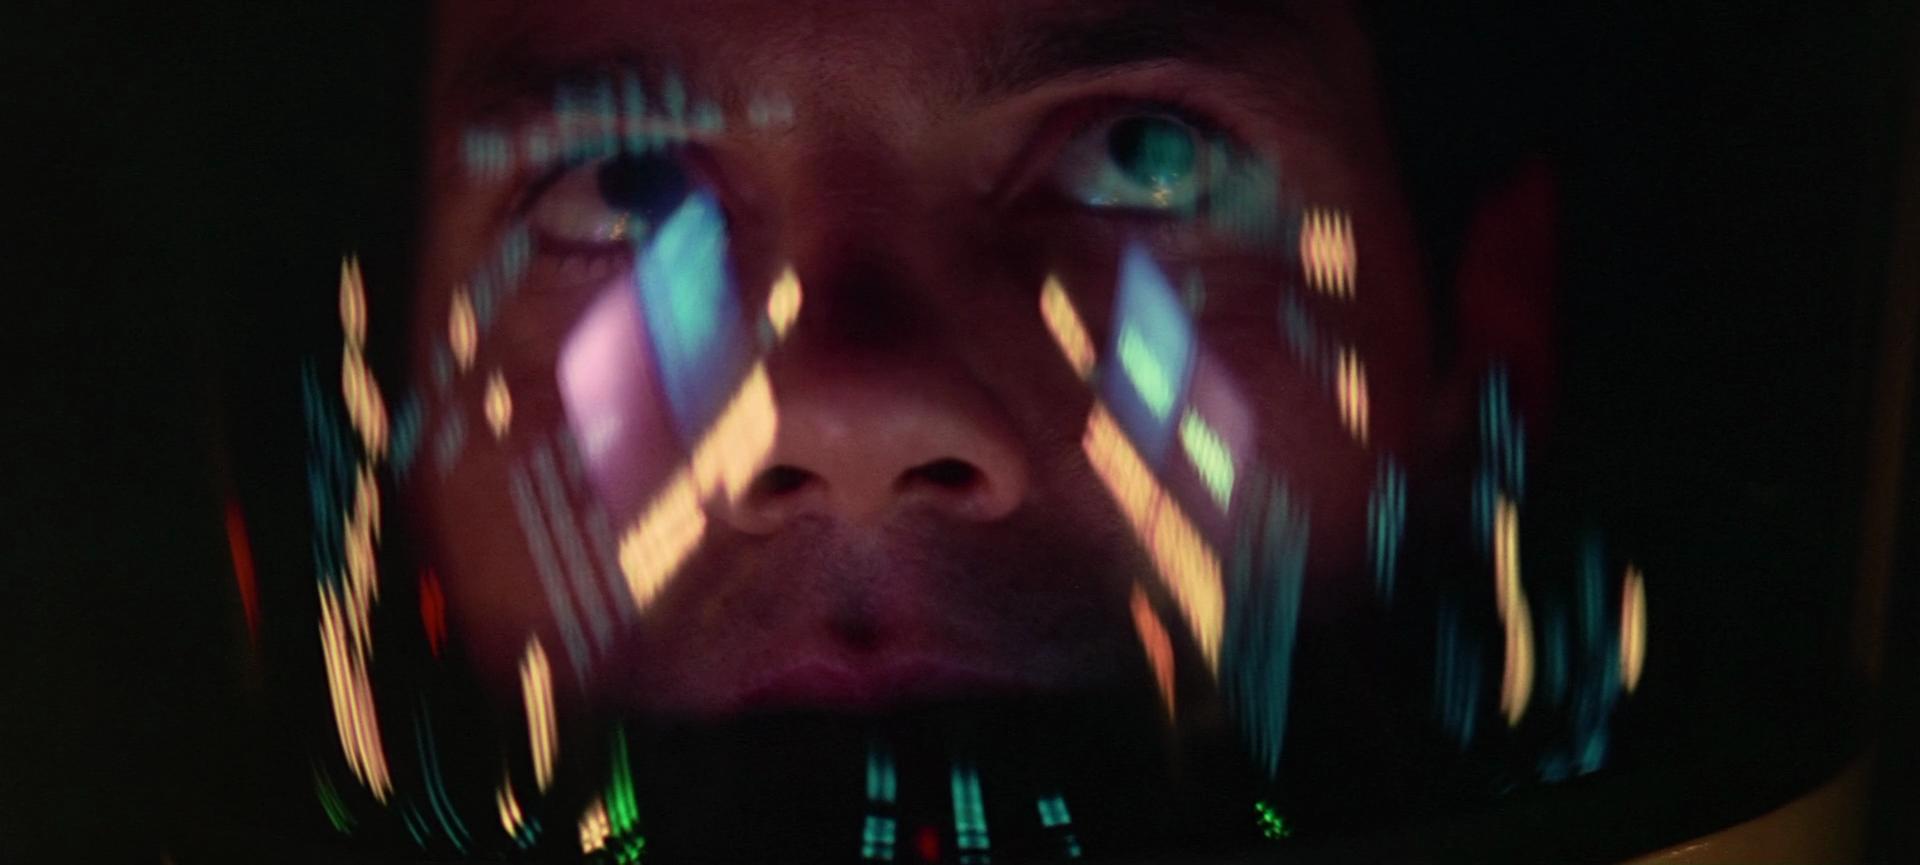 Movie 2001: A Space Odyssey Wallpaper 1920x865 px Free Download